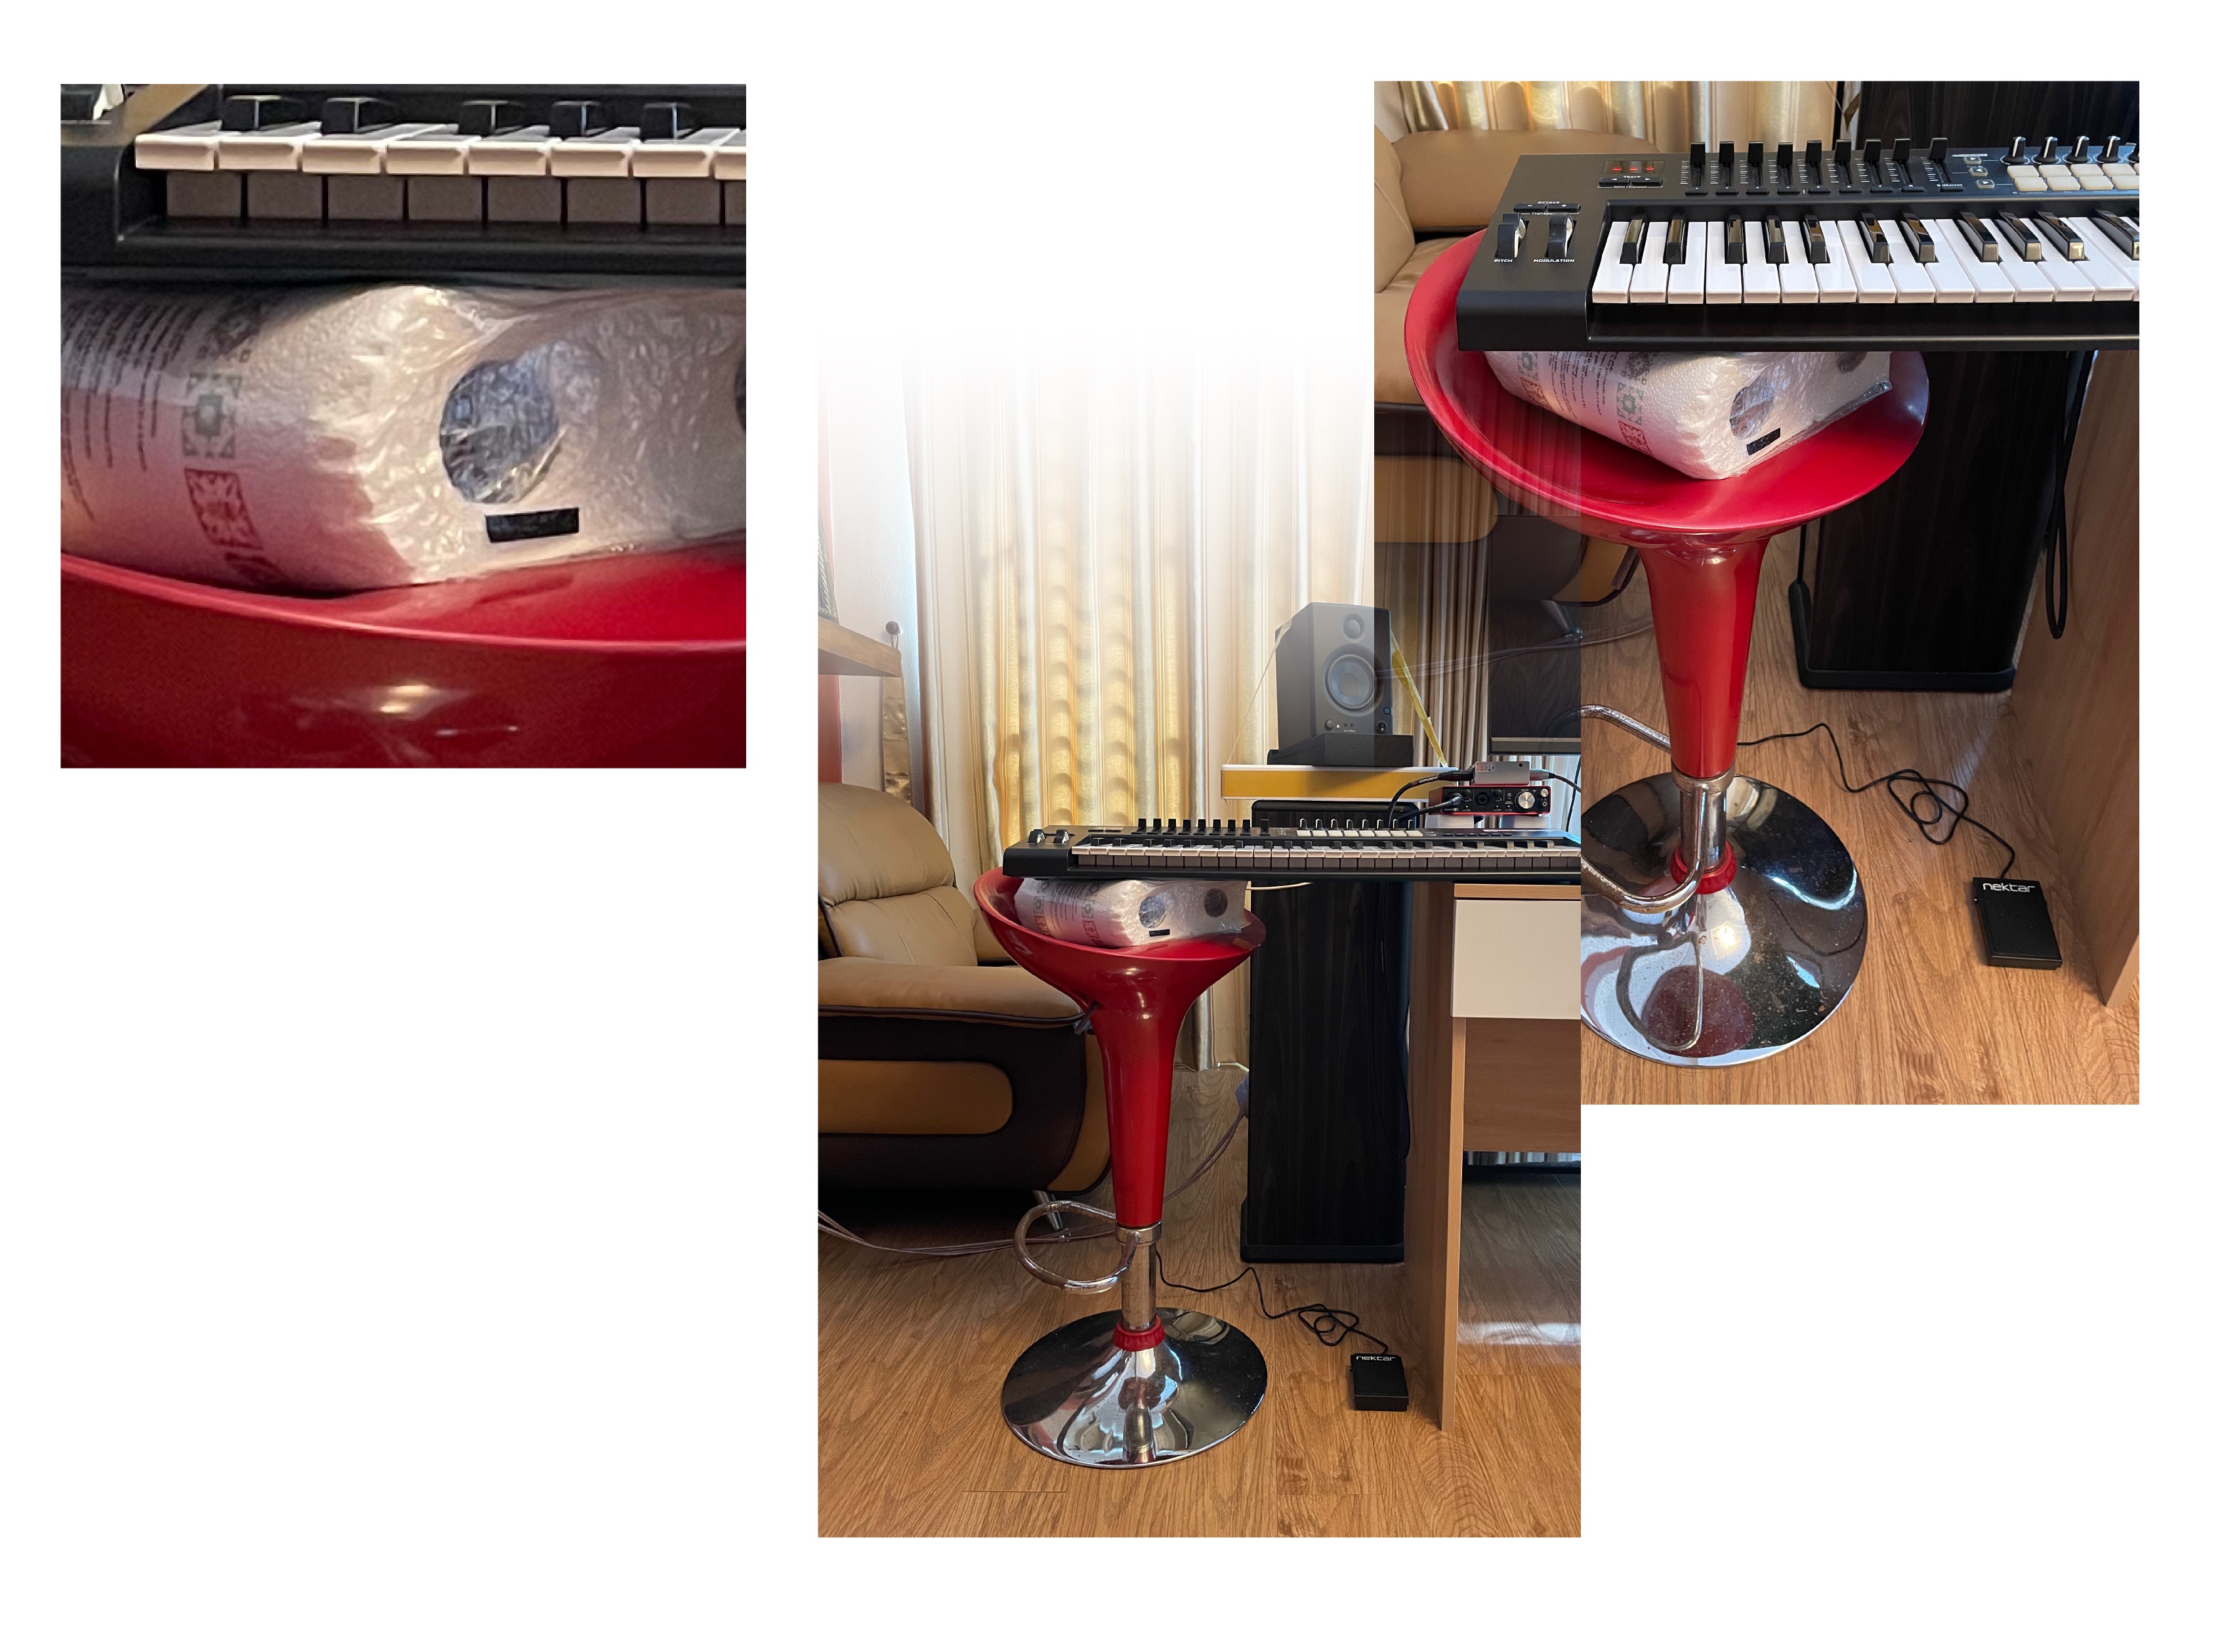 A red barstool with a package of paper towels on it is placed by a desk. An electric keyboard is supported on the left by the paper towels, and on the right by the desk. It's a makeshift piano stand. The room is brown.